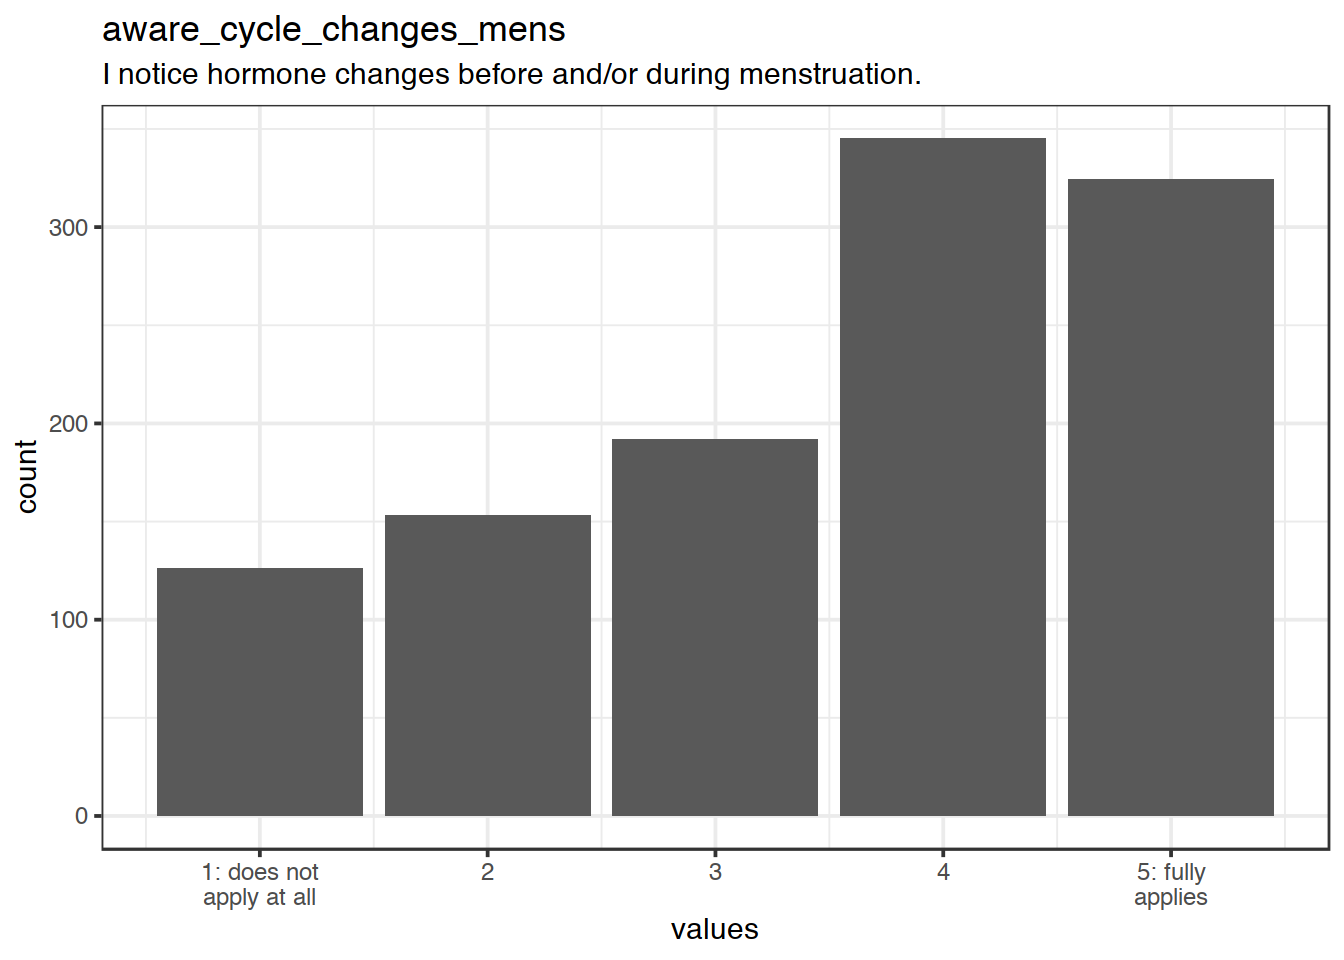 Distribution of values for aware_cycle_changes_mens